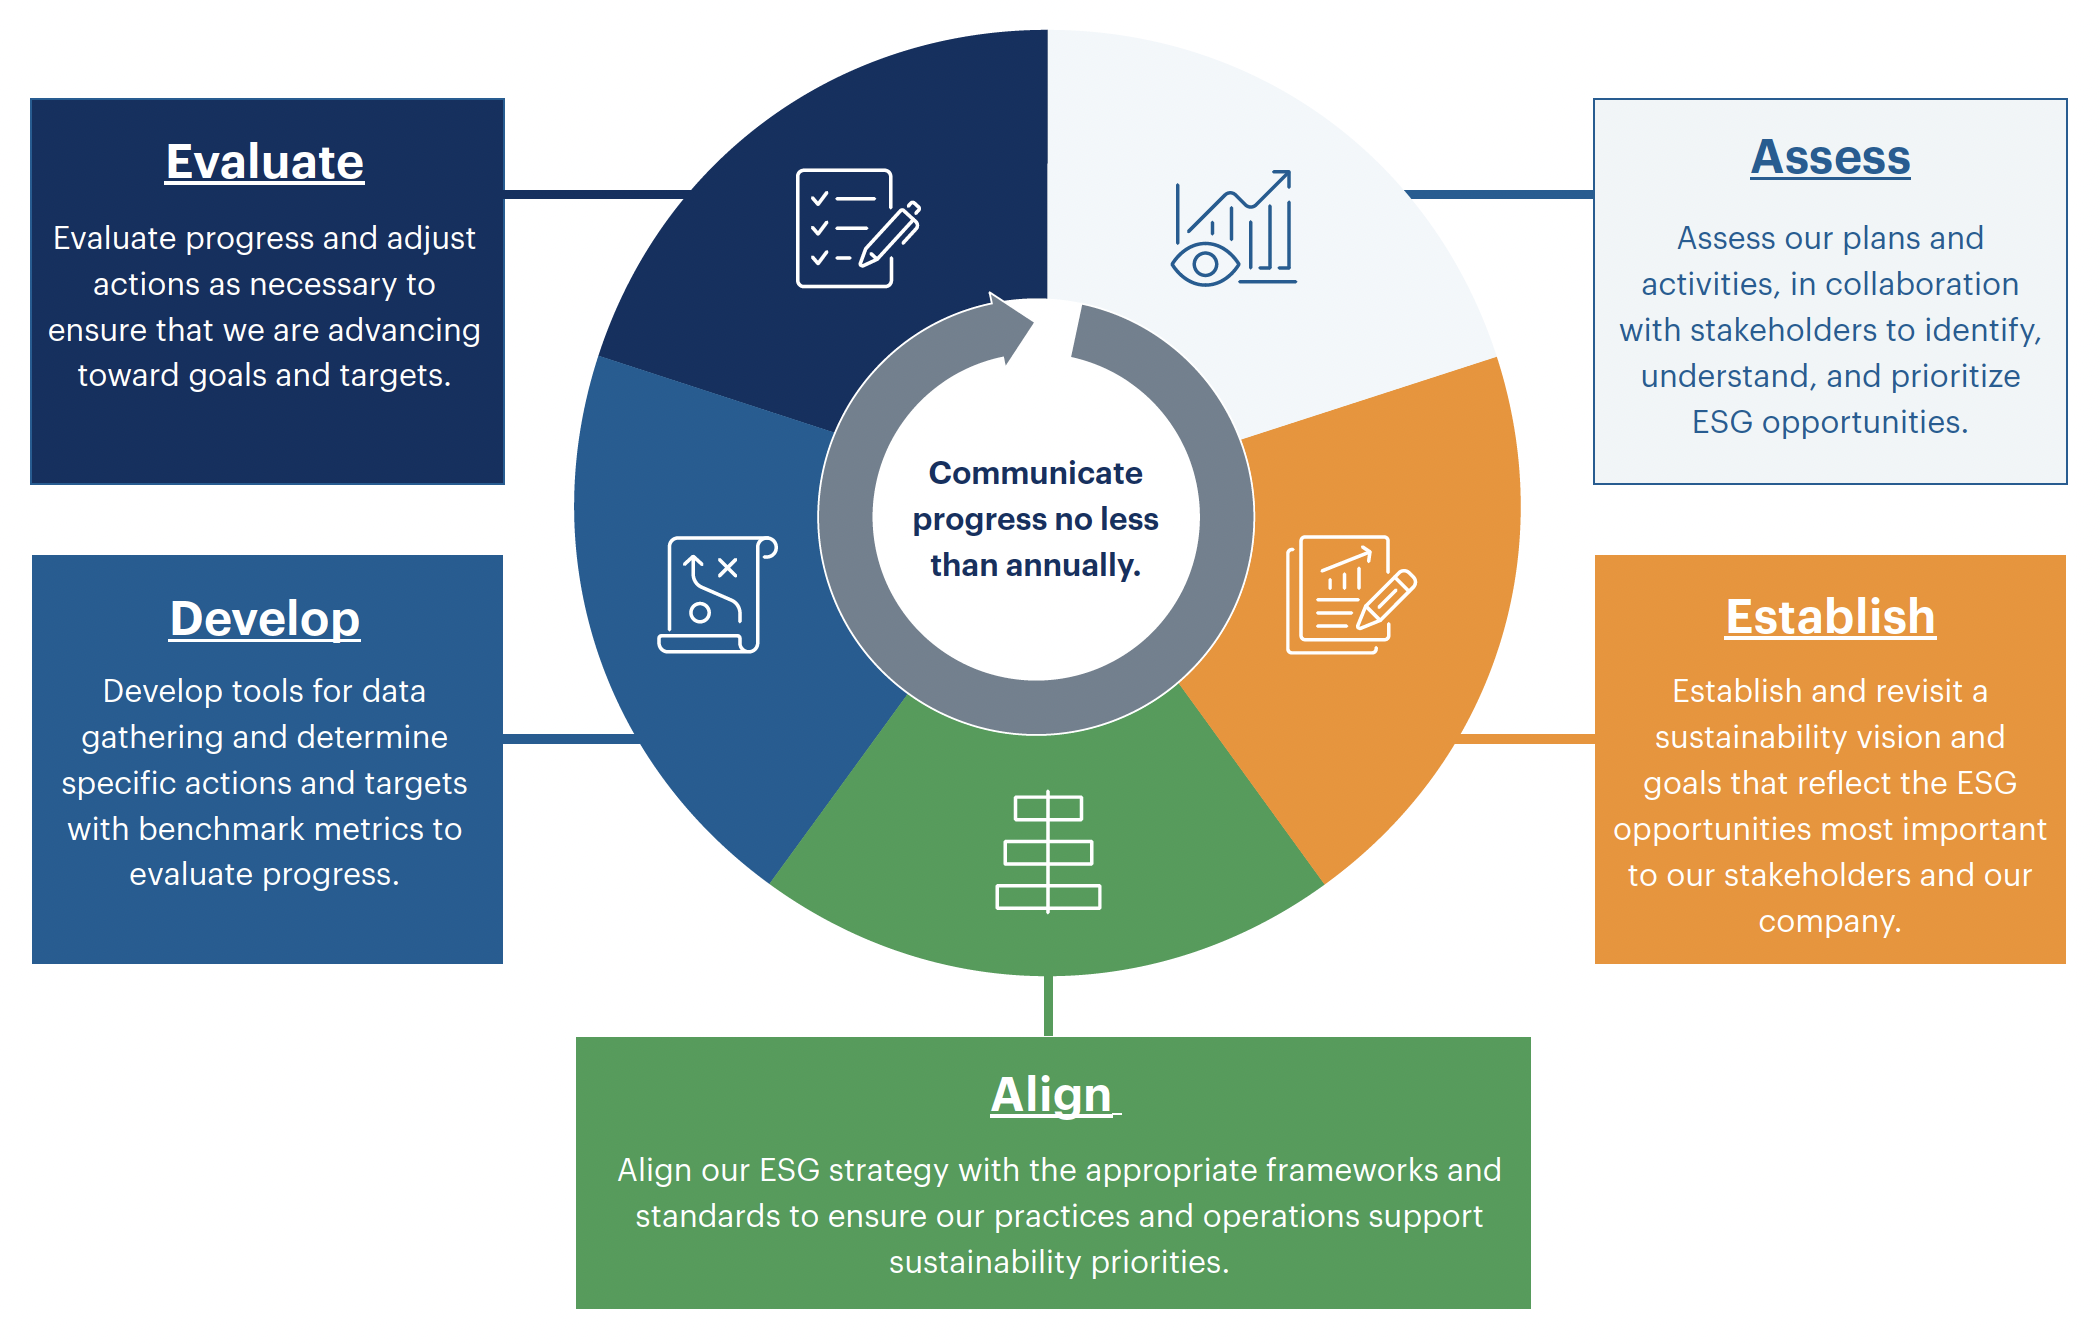 graphic showing our 6 sustainability intentions: assess, establish, align, develop, evaluate, and communicate